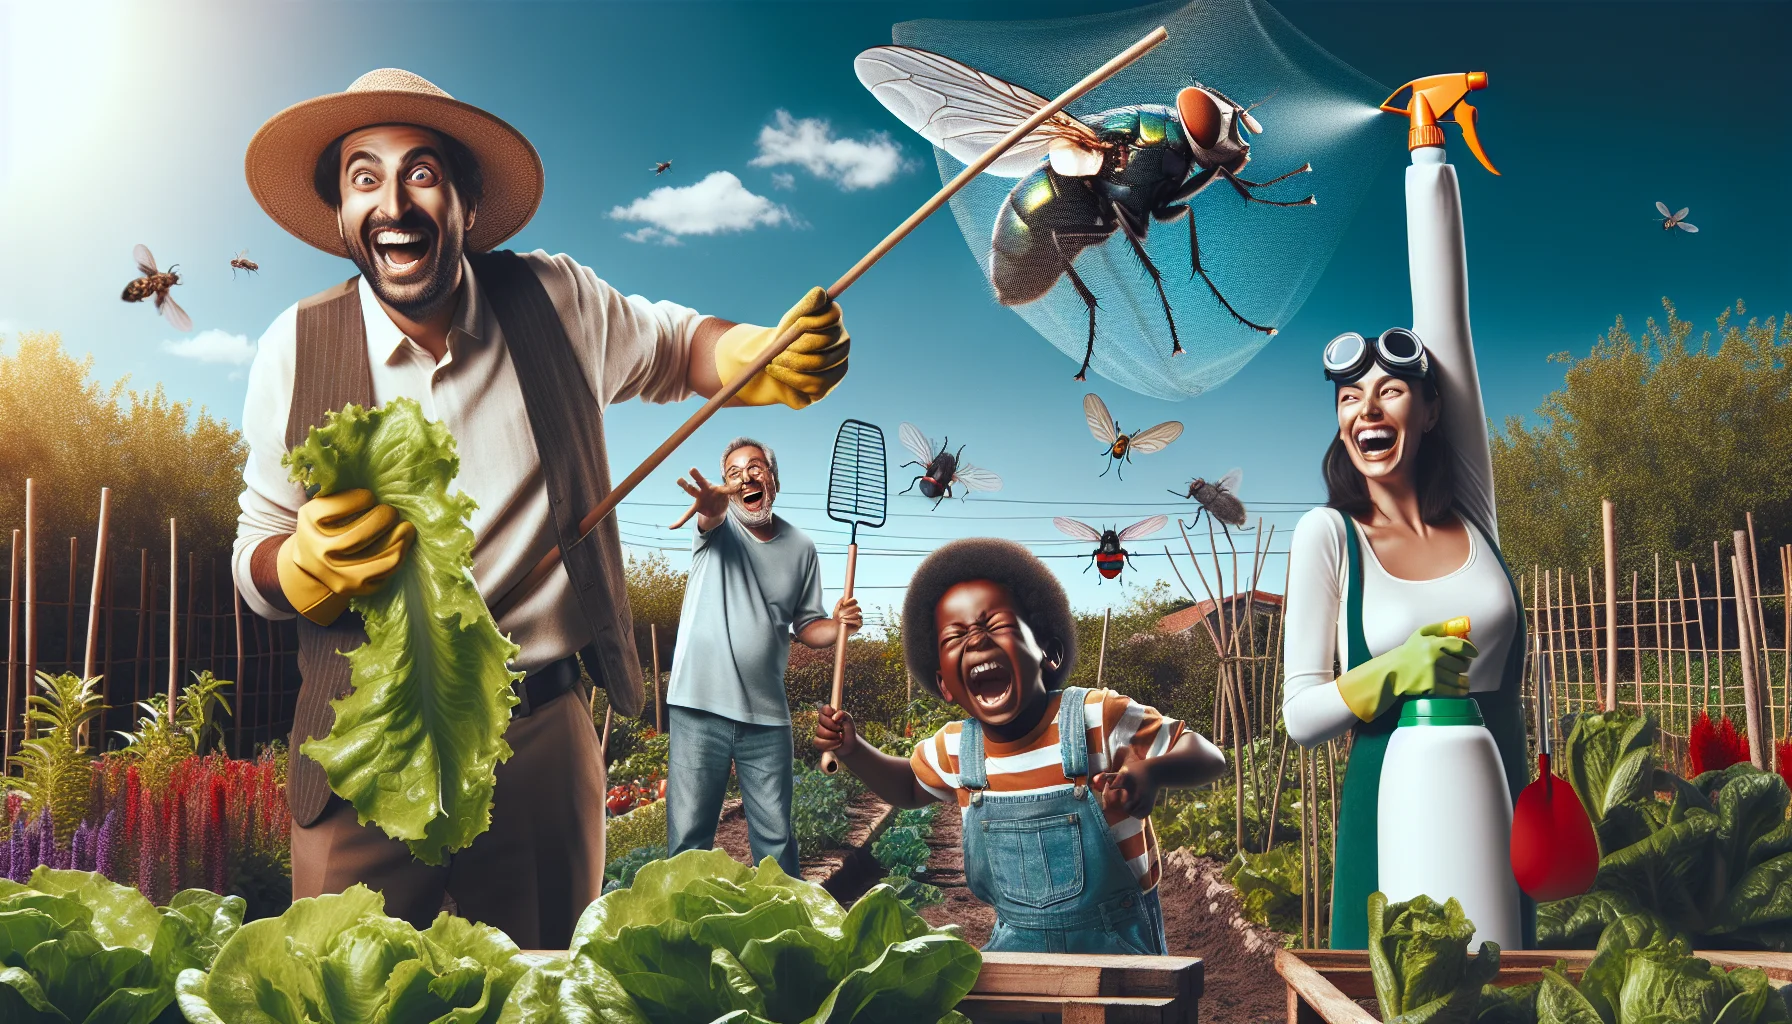 Create a humorous and realistic image showcasing a diverse group of people engaging in pest control for vegetable gardening. Picture a Middle-Eastern man wearing gardening gloves and a wide-brimmed hat, using a harmless bug-catching net to catch an enormous, exaggerated fly. Nearby, a Caucasian woman laughs out loud, holding an oversized spritz bottle filled with a natural pest repellent. A Black child, enthusiastically dons a pair of goggles, playfully chasing a cartoonish snail with a lettuce leaf. The background is filled with a healthy, vibrant vegetable garden under a brilliant sunshine, underscoring the fun and joy of gardening.